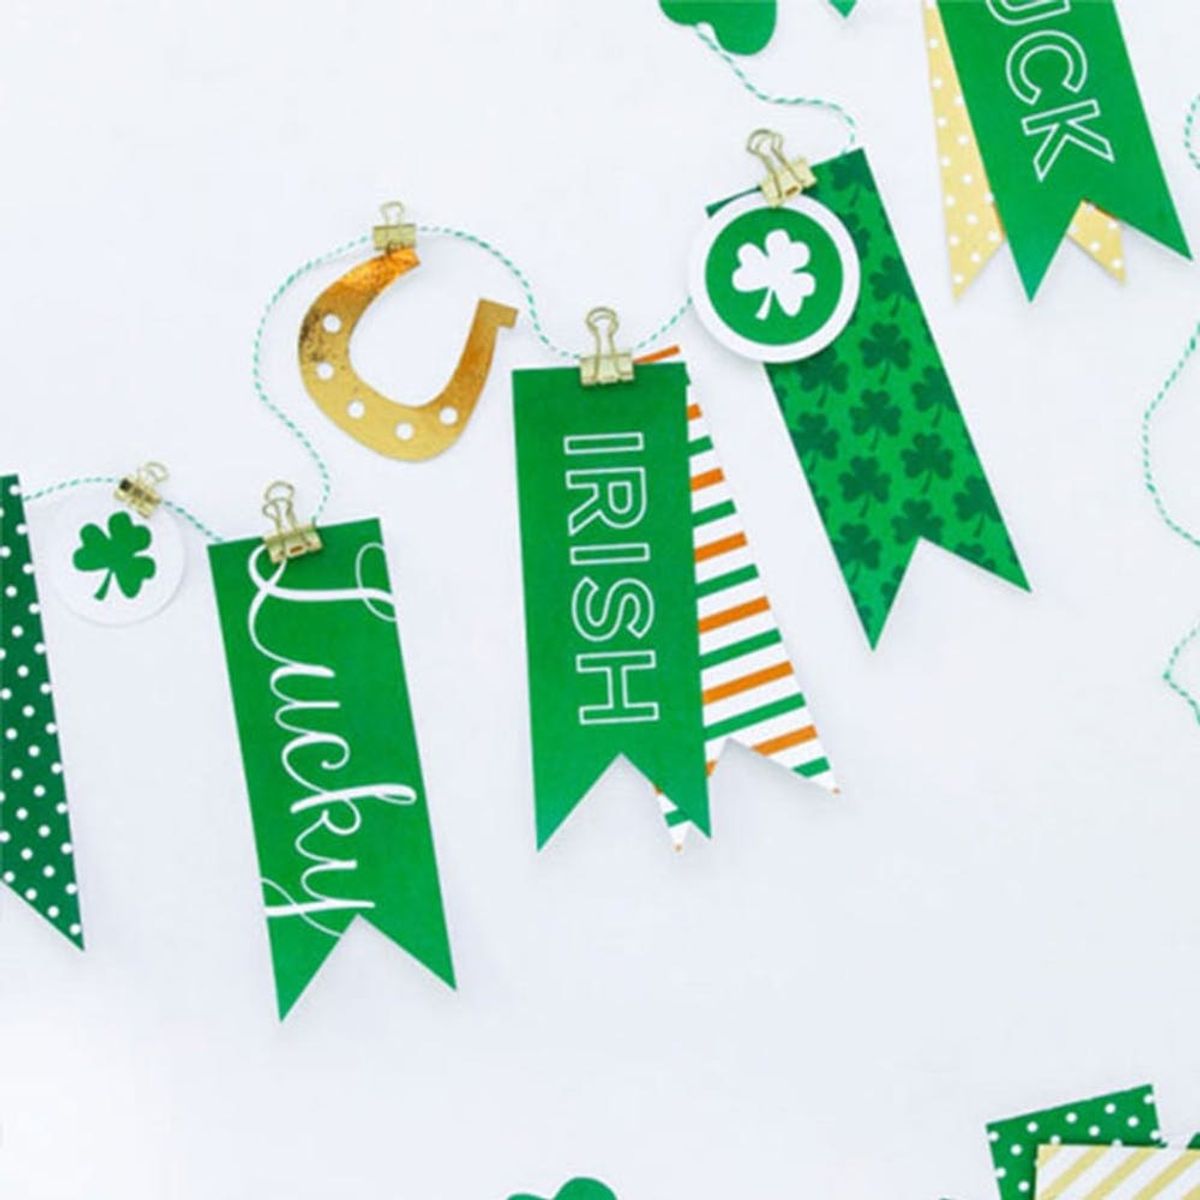 14 St. Patrick’s Day Crafts to Make Now